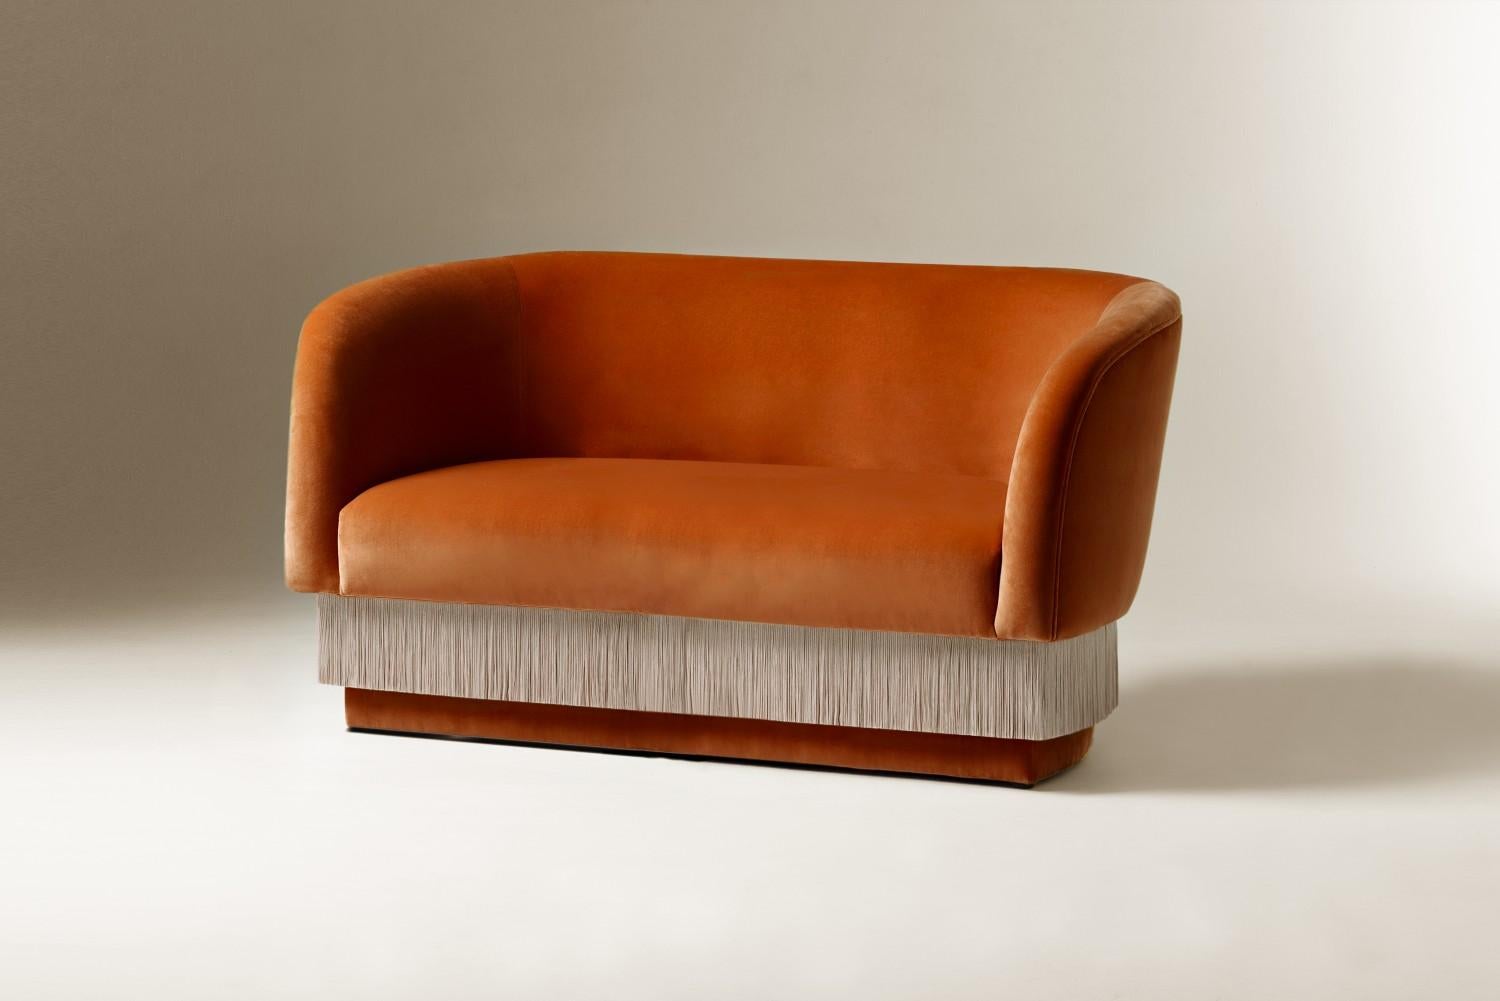 Folie sofa by Dooq
Measures: W 140 cm 55” (also available in 180cm, or made to order in other dimensions)
D 85 cm 33”
H 75 cm 30”
Seat height 42 cm 17

Materials: Upholstery and piping fabric or leather, fringes.

Dooq is a design company